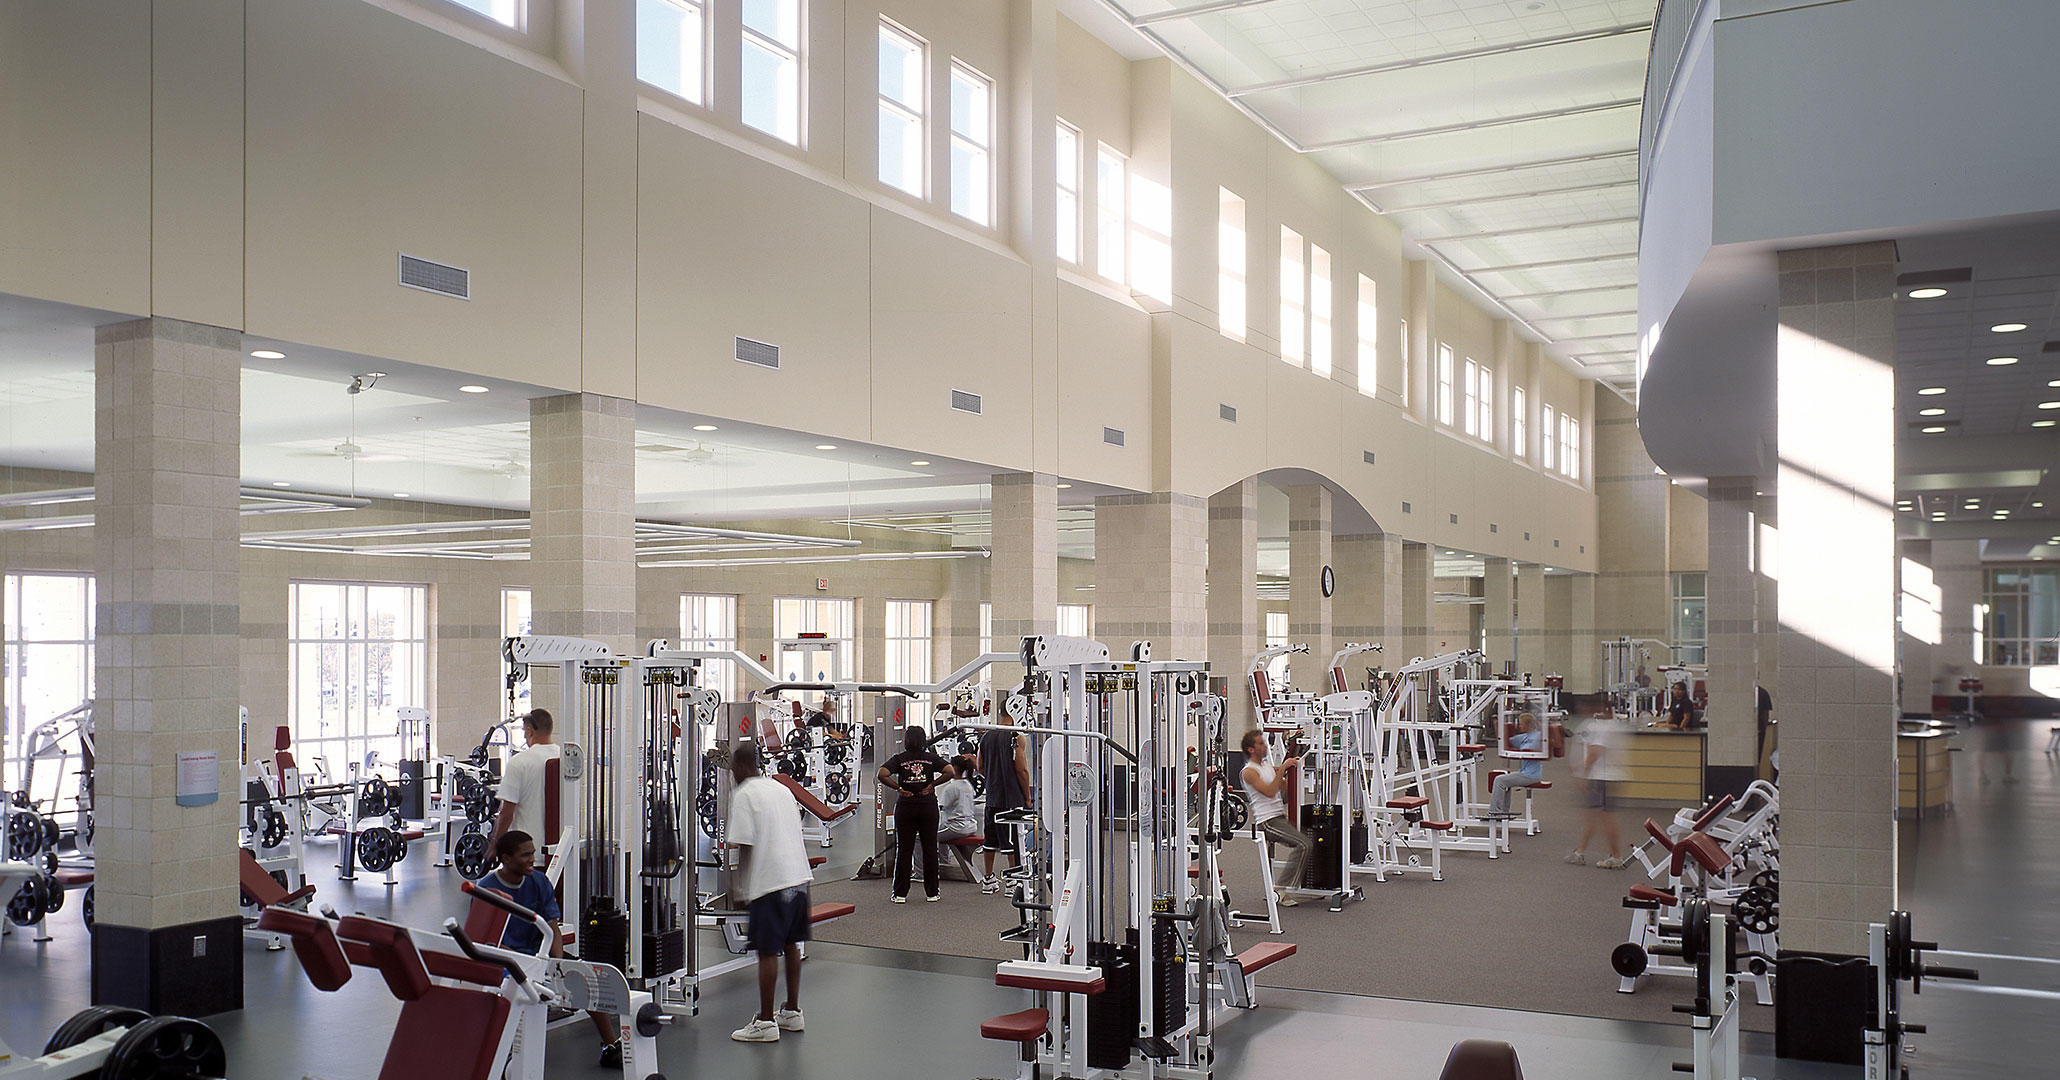 University of South Carolina and Boudreaux architects designed student gym on the corner of Assembly and Blossom Street.